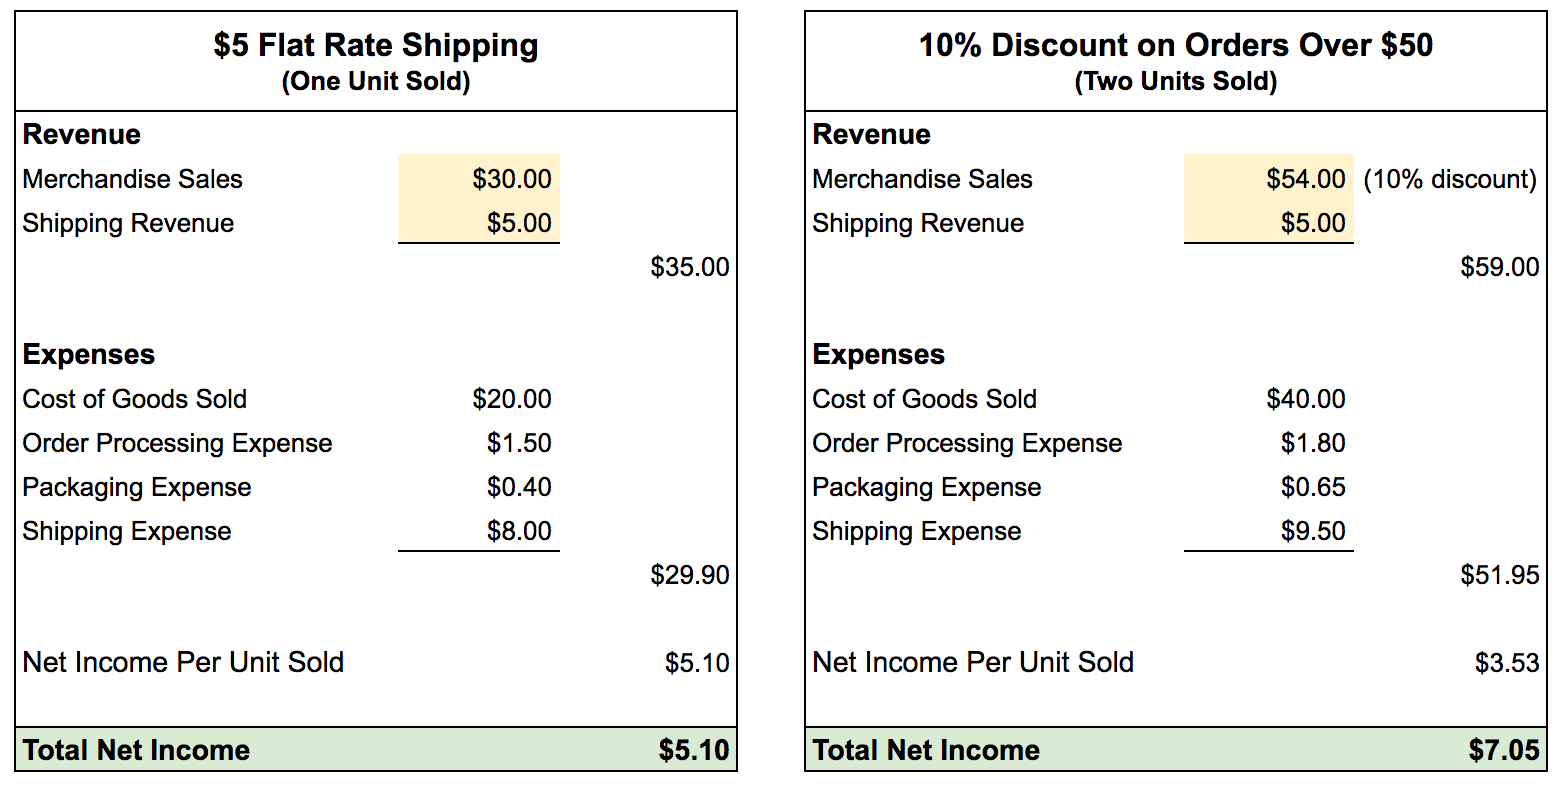 In this example, offering flat rate shipping for $5 produces a net income of $5.10 for a single unit sold. When two units are sold with a 10 percent discount, the net income increases to $7.05. <em>(Click image to enlarge.)</em>